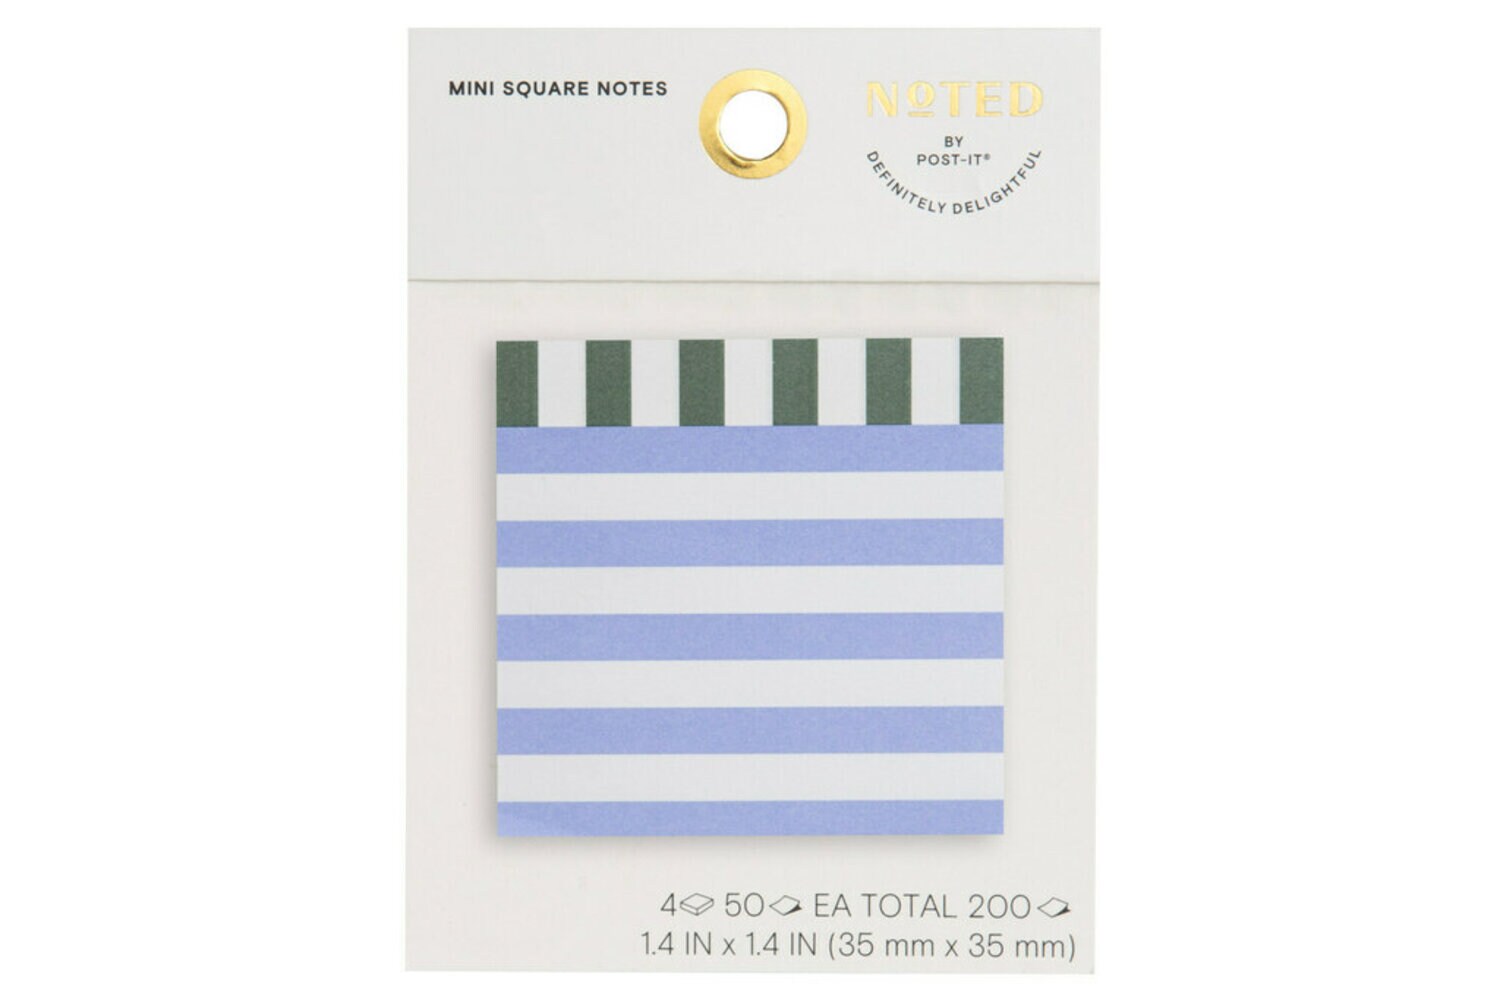 7100275943 - Post-it Square Notes NTD6-33-1, 2.9 in x 2.8 in (73 mm x 71 mm)